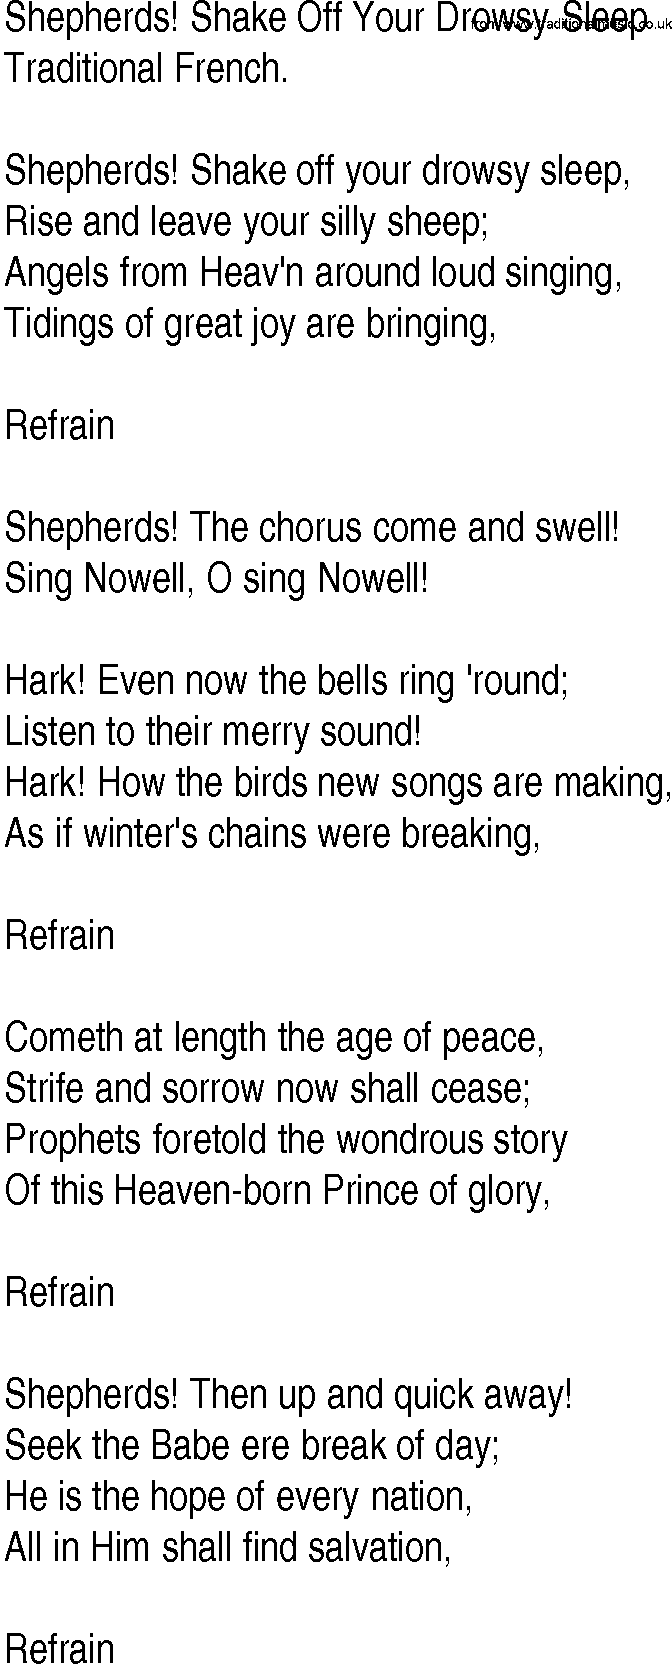 Hymn and Gospel Song: Shepherds! Shake Off Your Drowsy Sleep by Traditional French lyrics